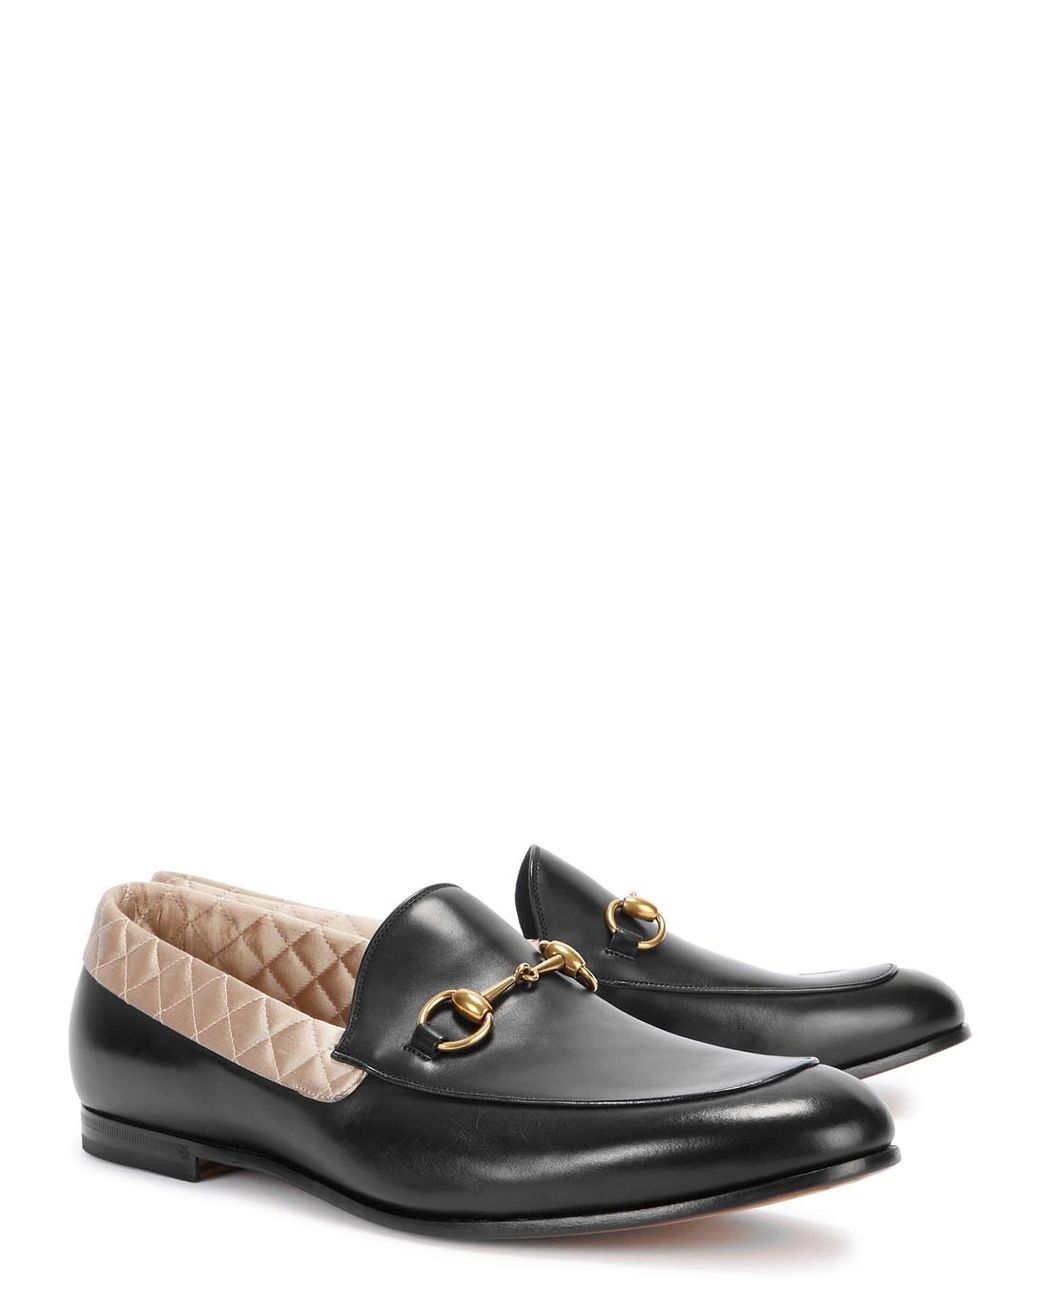 Gucci Betis Glamour Black Leather Loafers | Lyst UK